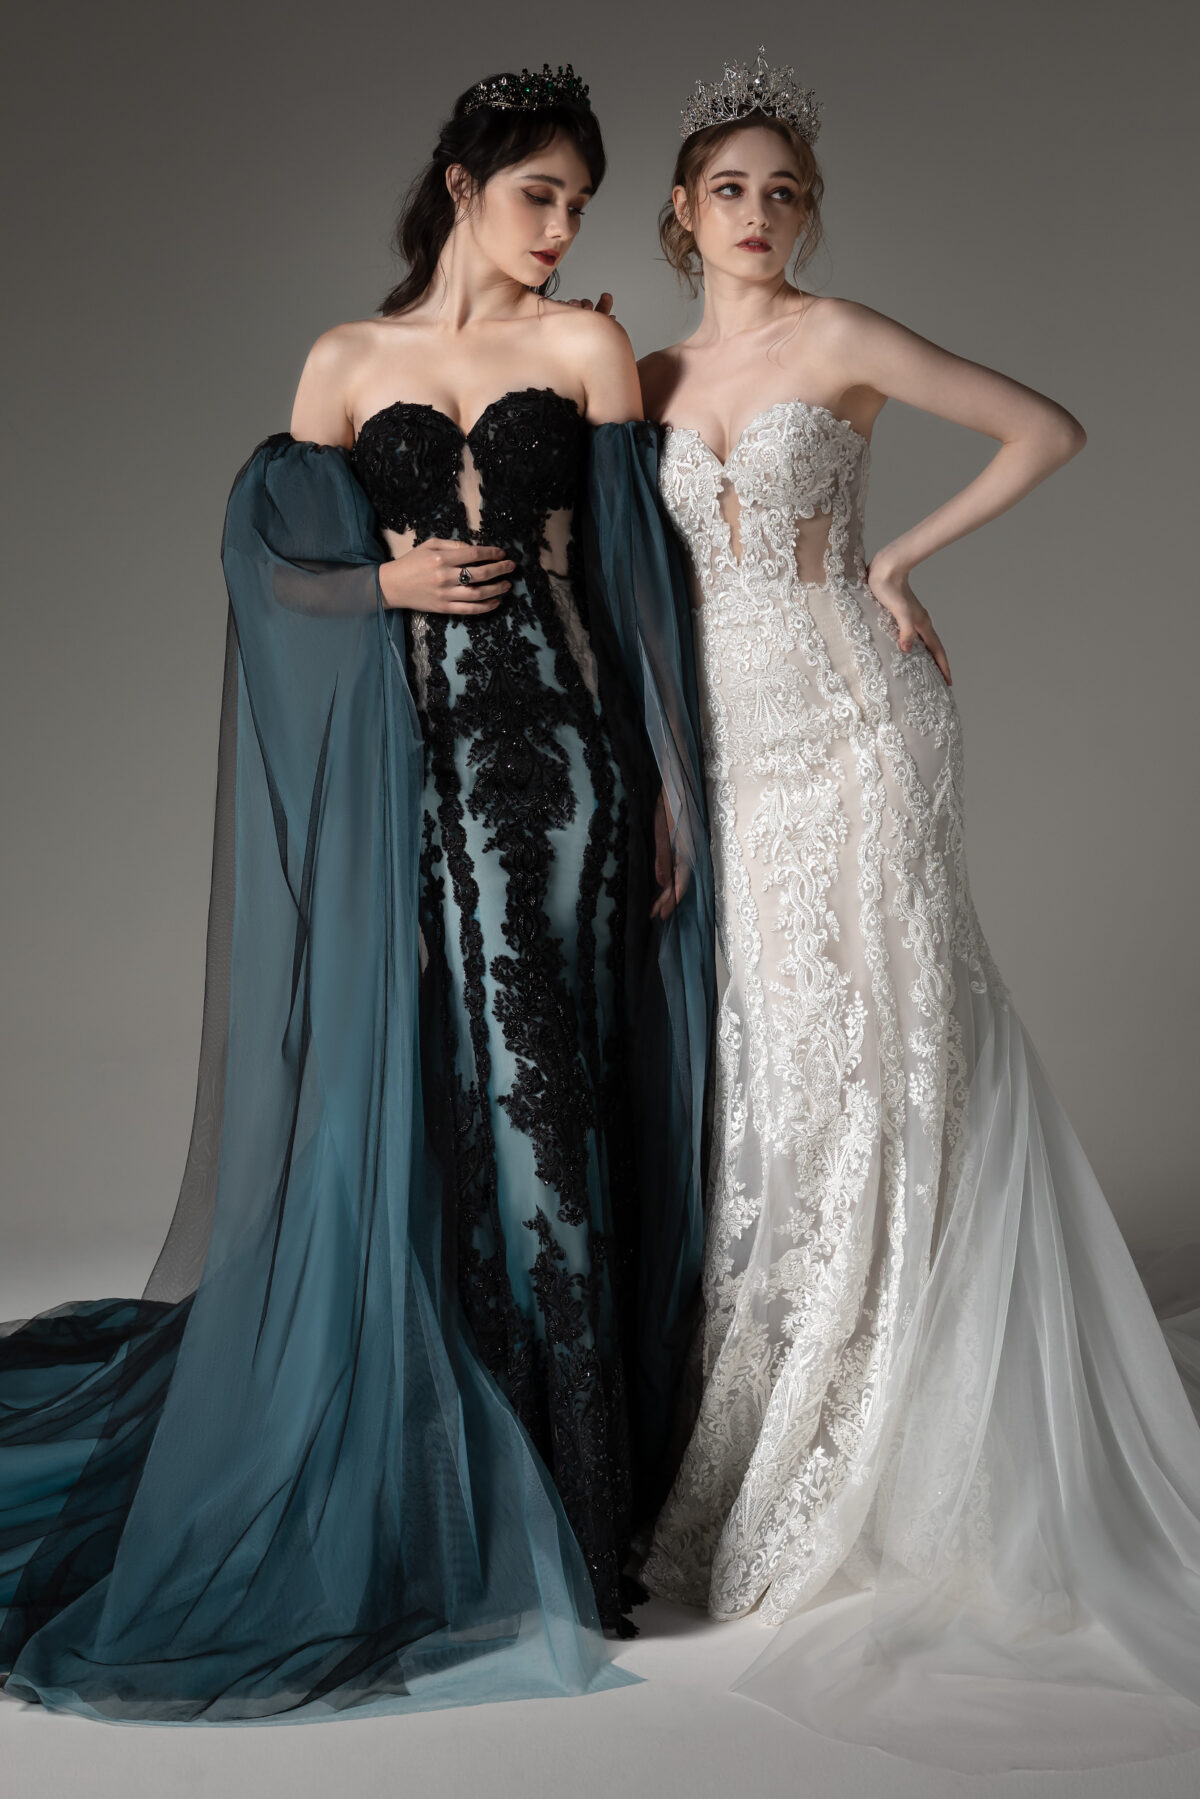 Colored Wedding Dresses by Cocomelody 2022 - CW2504 | MARIANA + CW2505 | ELLIS